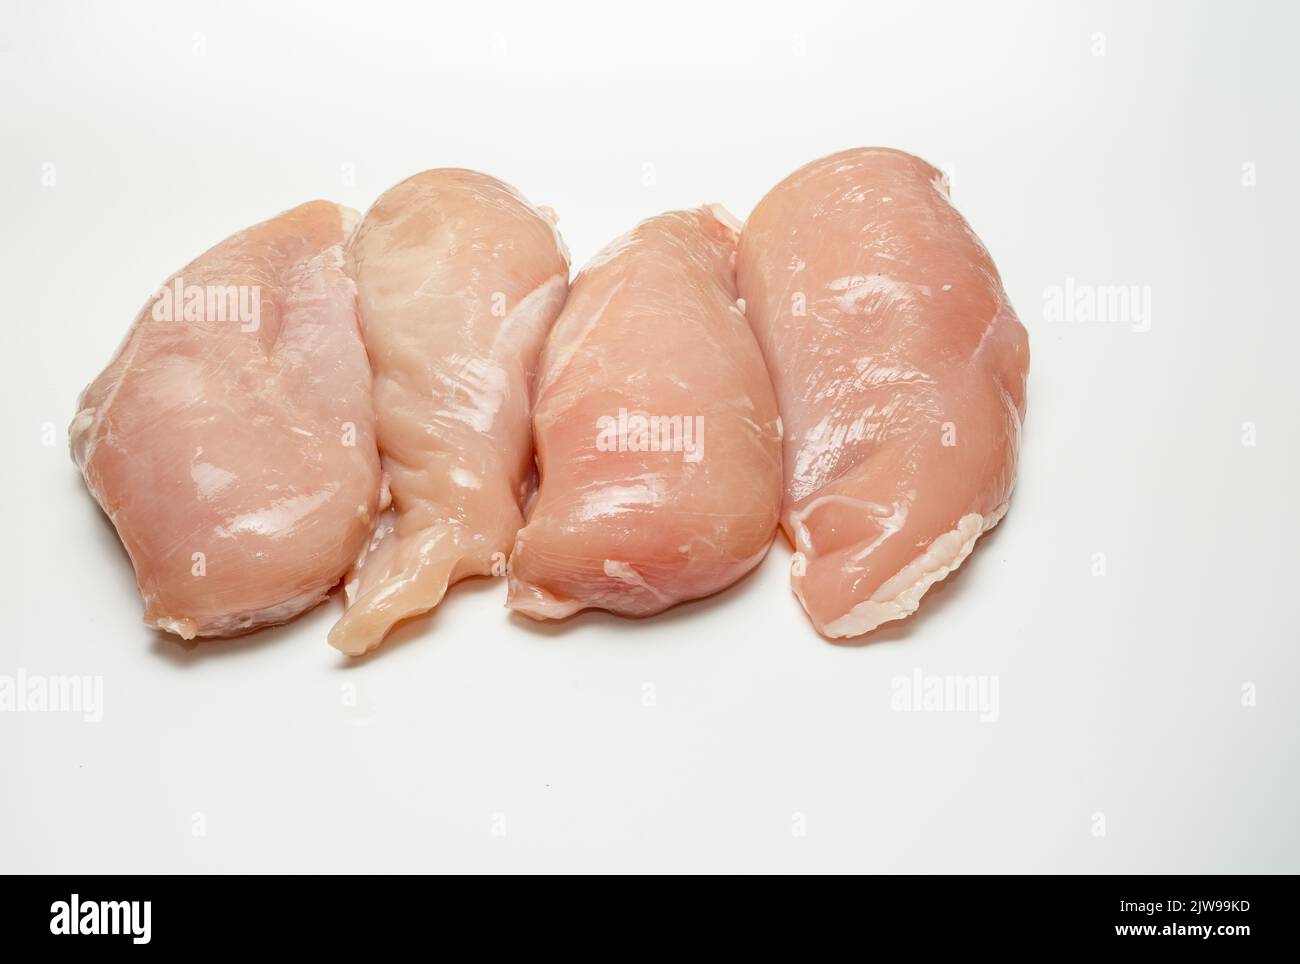 Raw uncooked prepared poultry chicken breasts on a white background Stock Photo